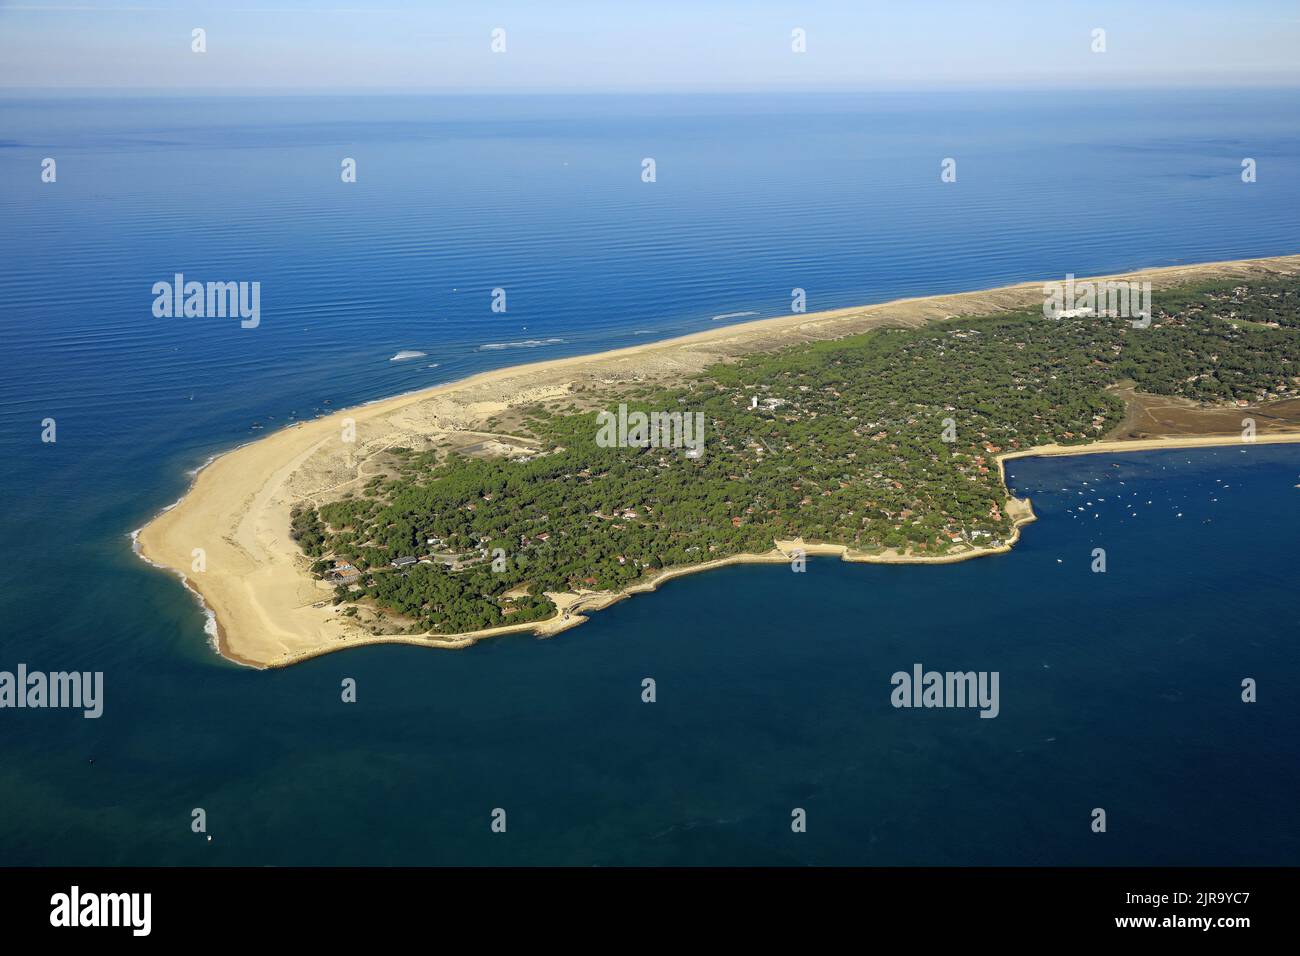 Lege-Cap-Ferret (south-western France): aerial view of the Cap Ferret peninsula at the entrance to the Arcachon Bay and its fine sand beach Stock Photo